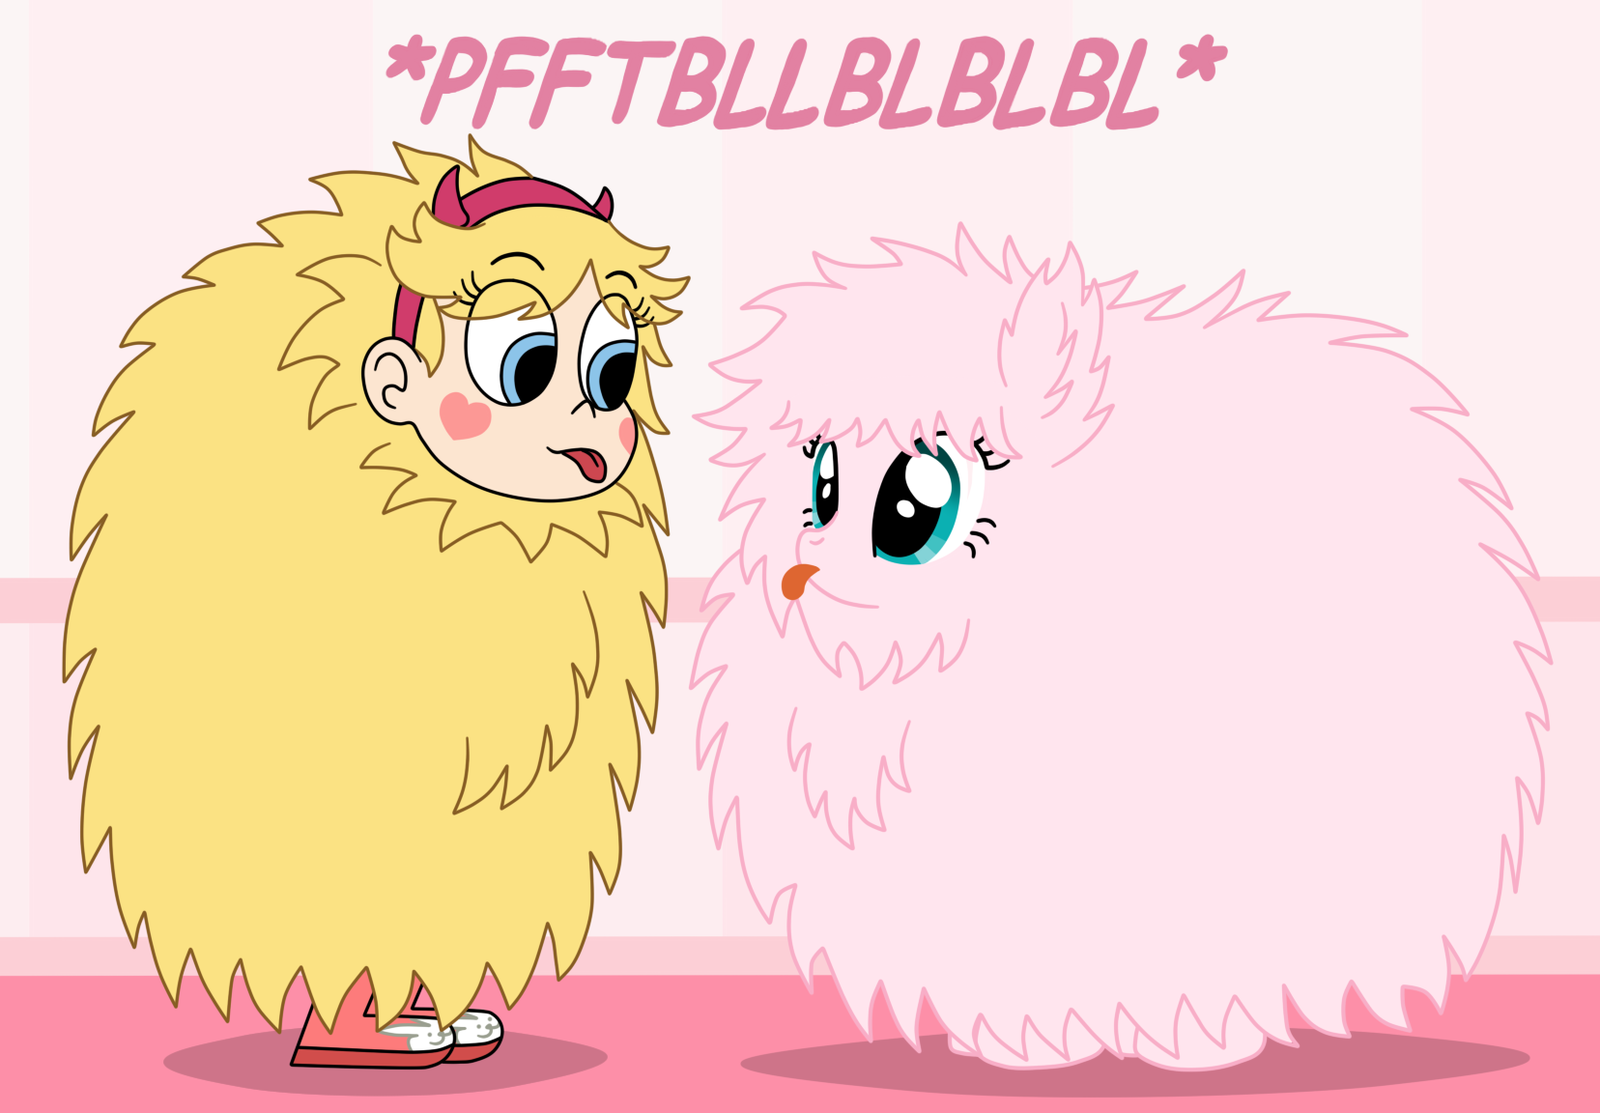 star_and_fluffle_puff_in_giant_fuzzy_bal